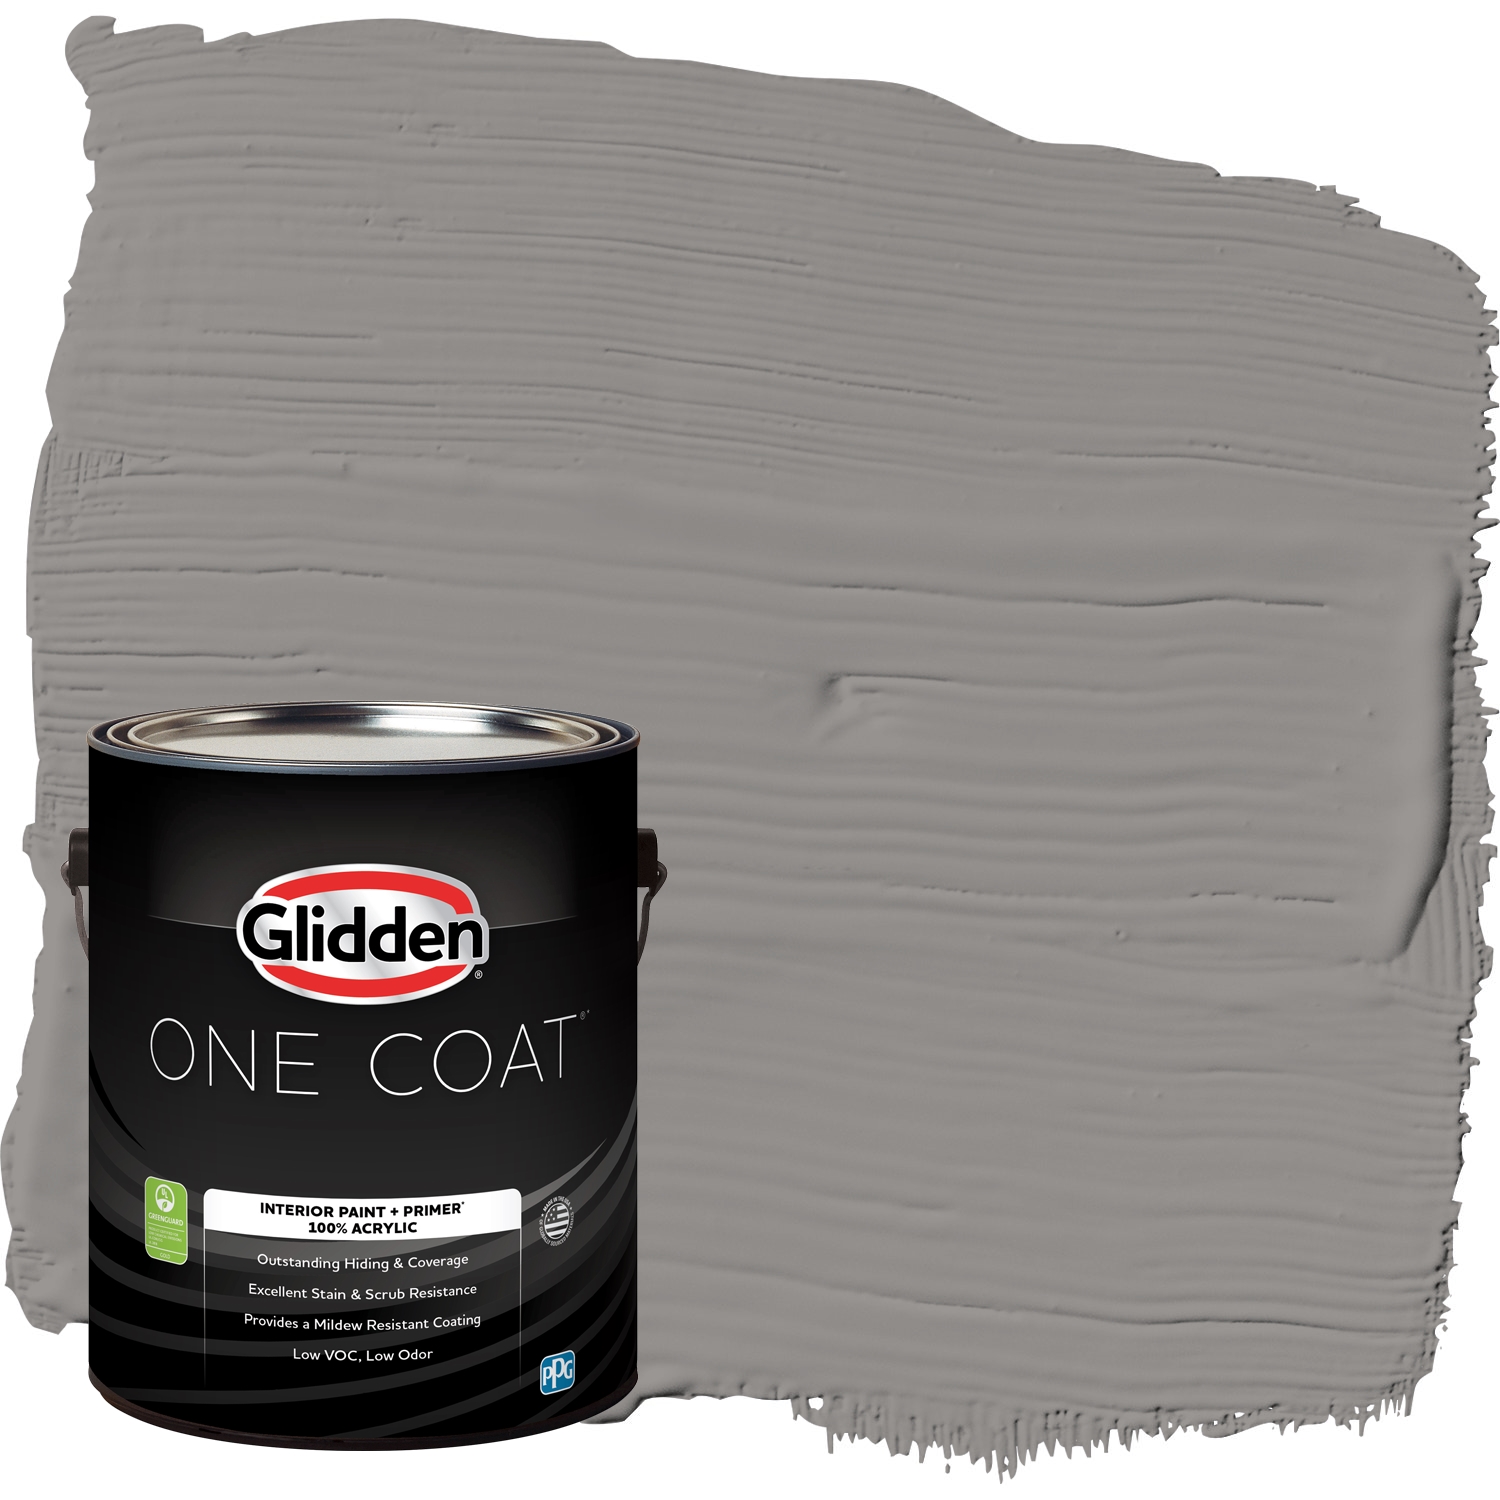 Glidden One Coat Interior Paint and Primer, Antique Silver / Gray, Gallon,  Flat